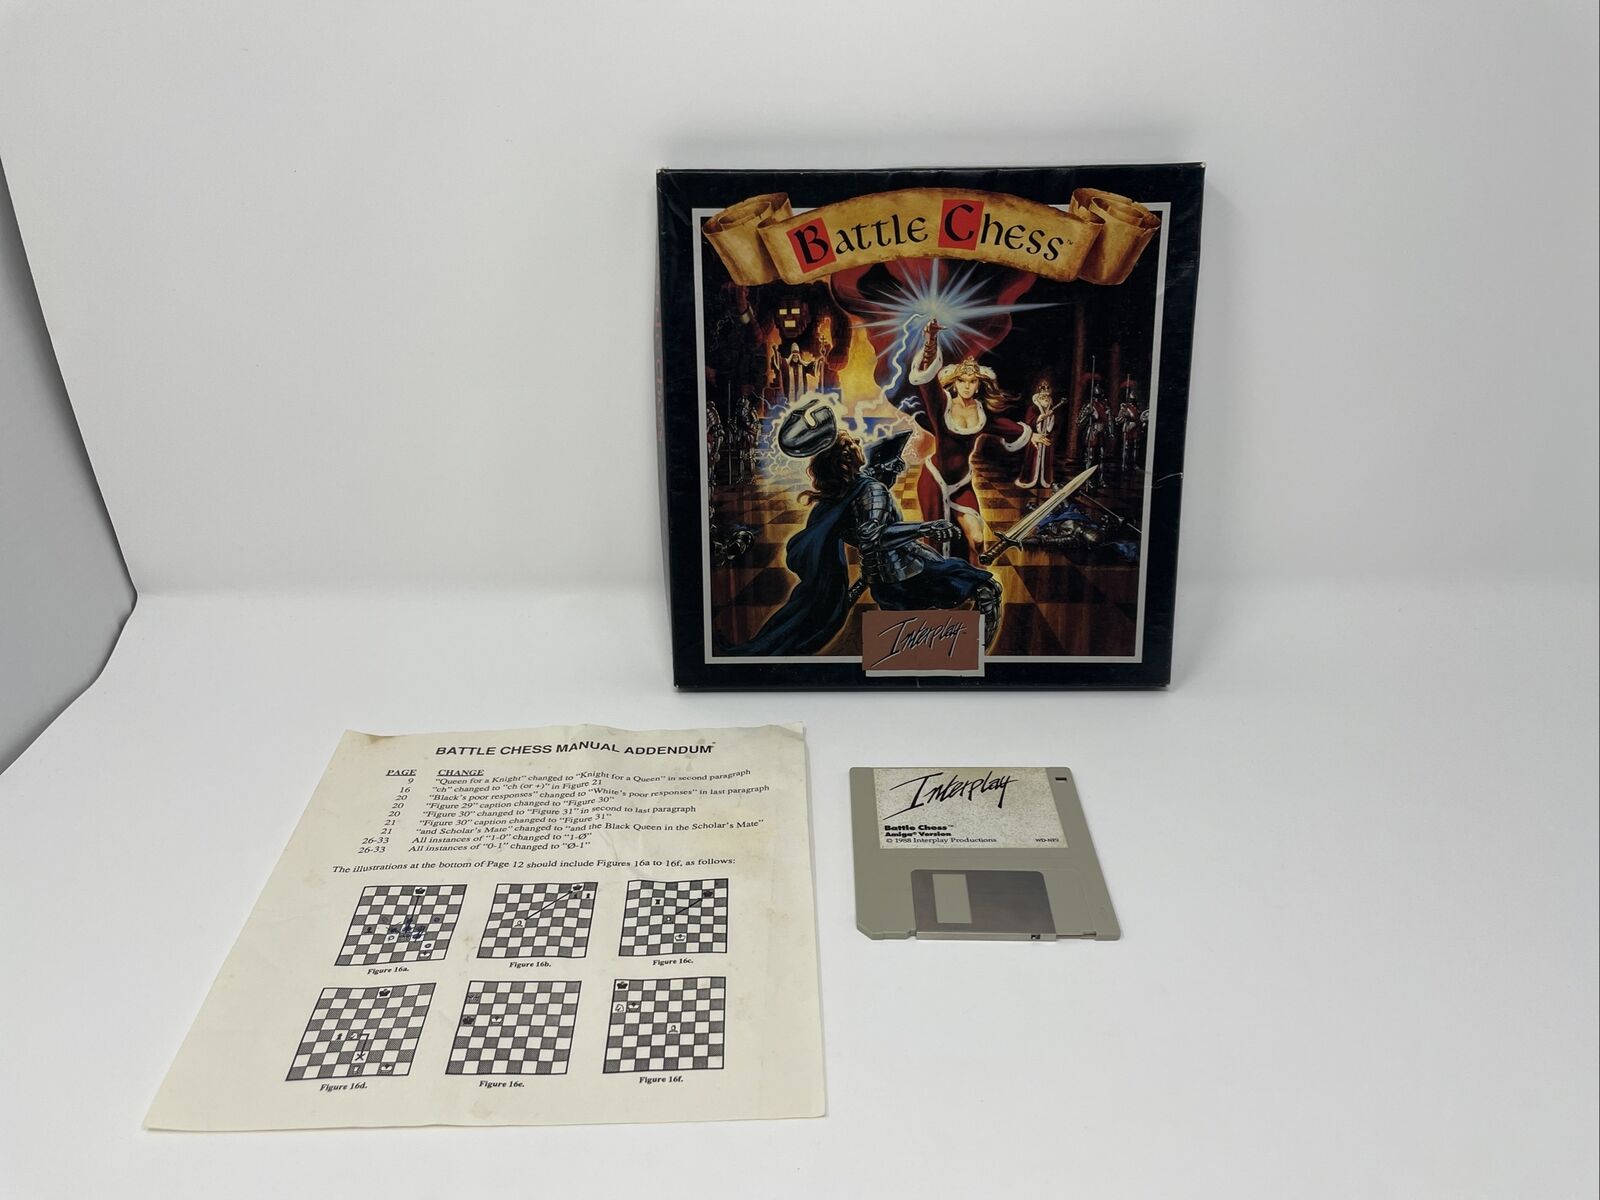 Commodore Amiga Game BATTLE CHESS by INTERPLAY  Boxed w/ Disks + Manuals